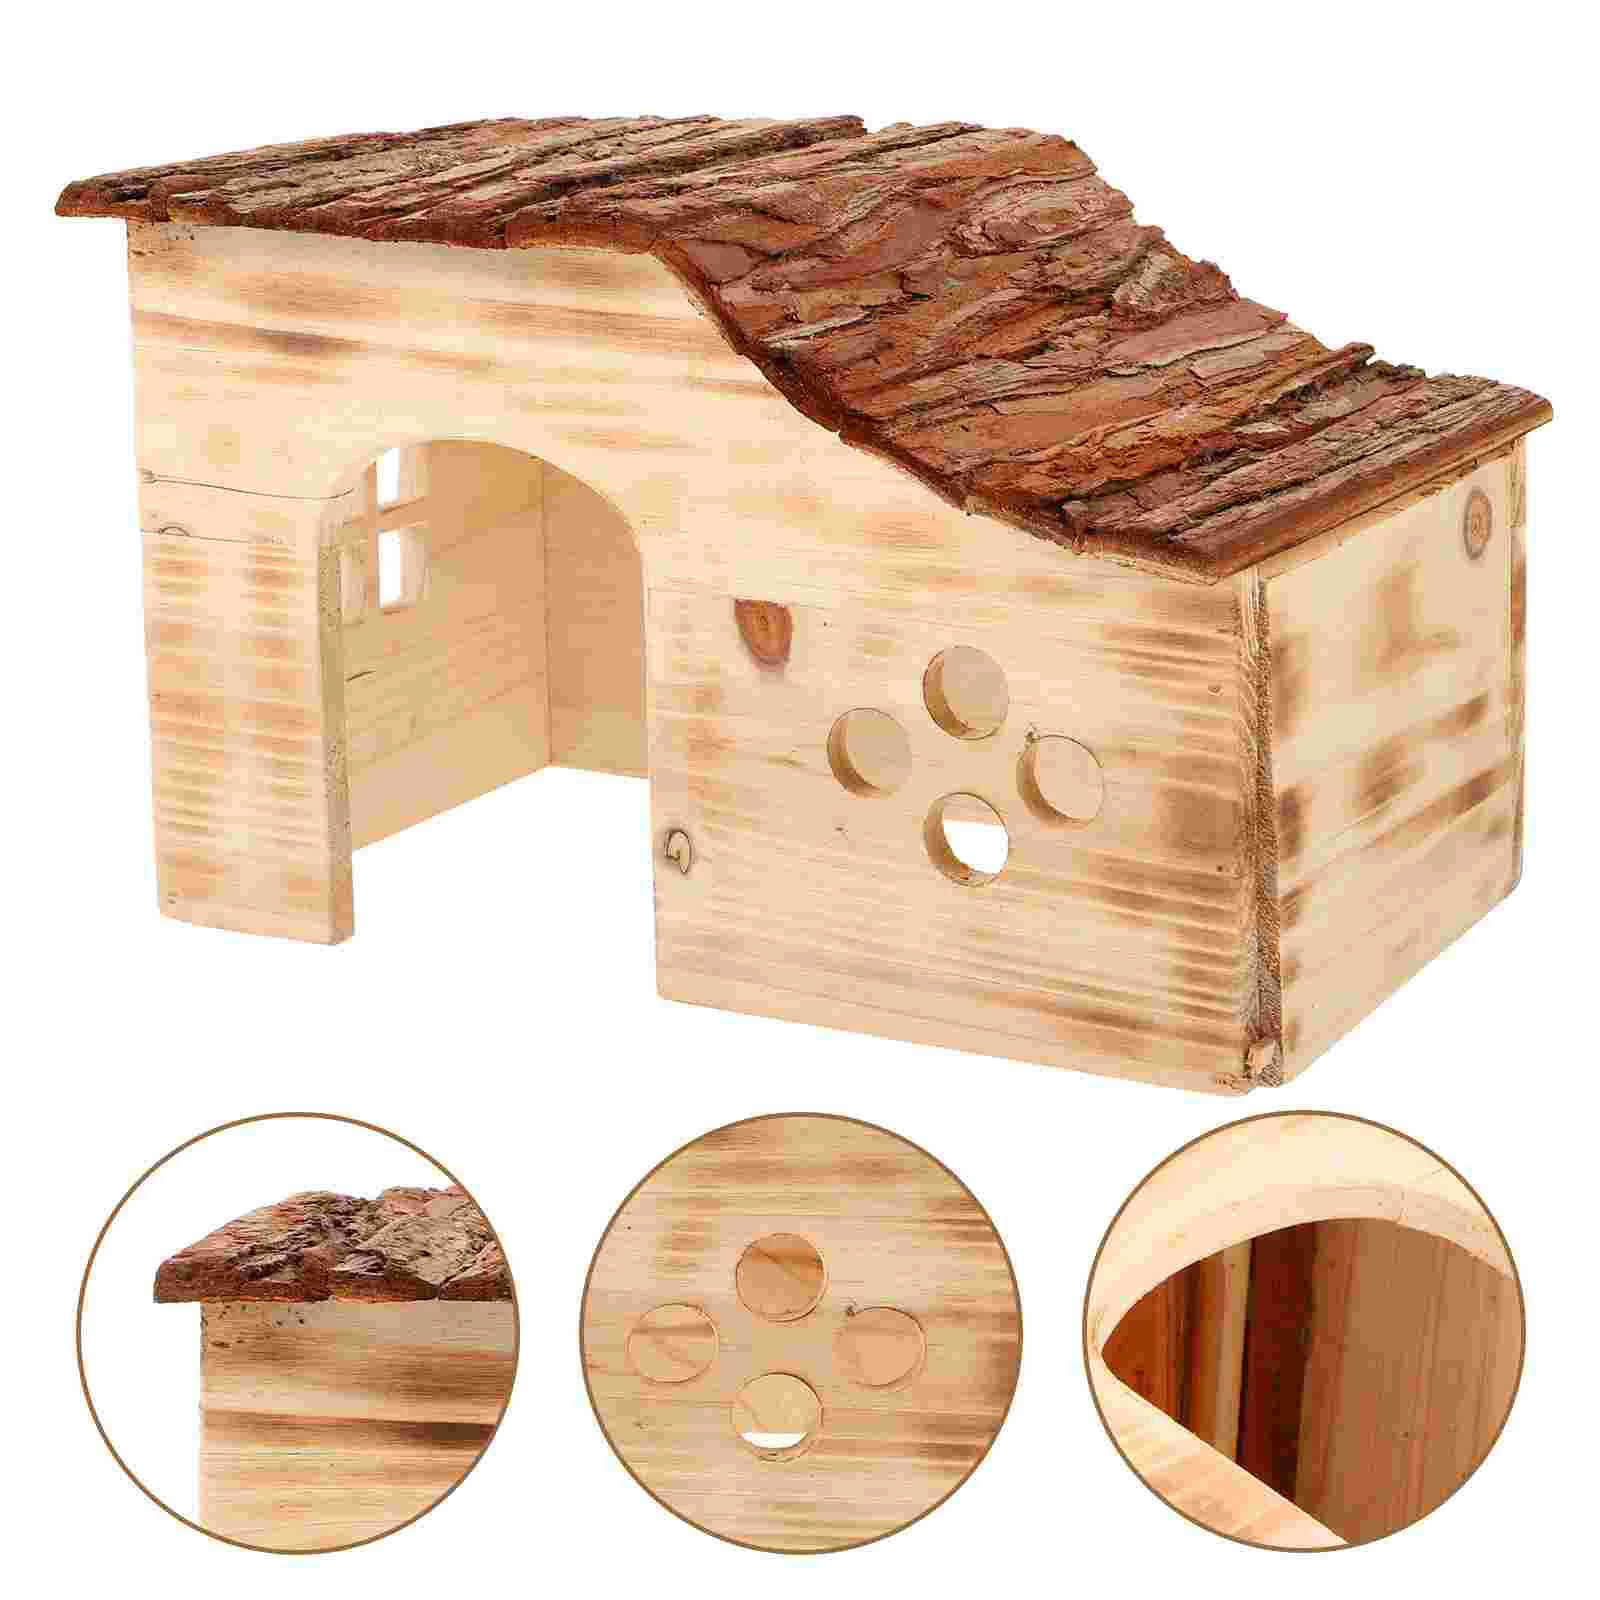 

Wooden Playset Hamster Cabin House for All Seasons Guinea Pig Rest Small Pet Toy Hideout Hideouts